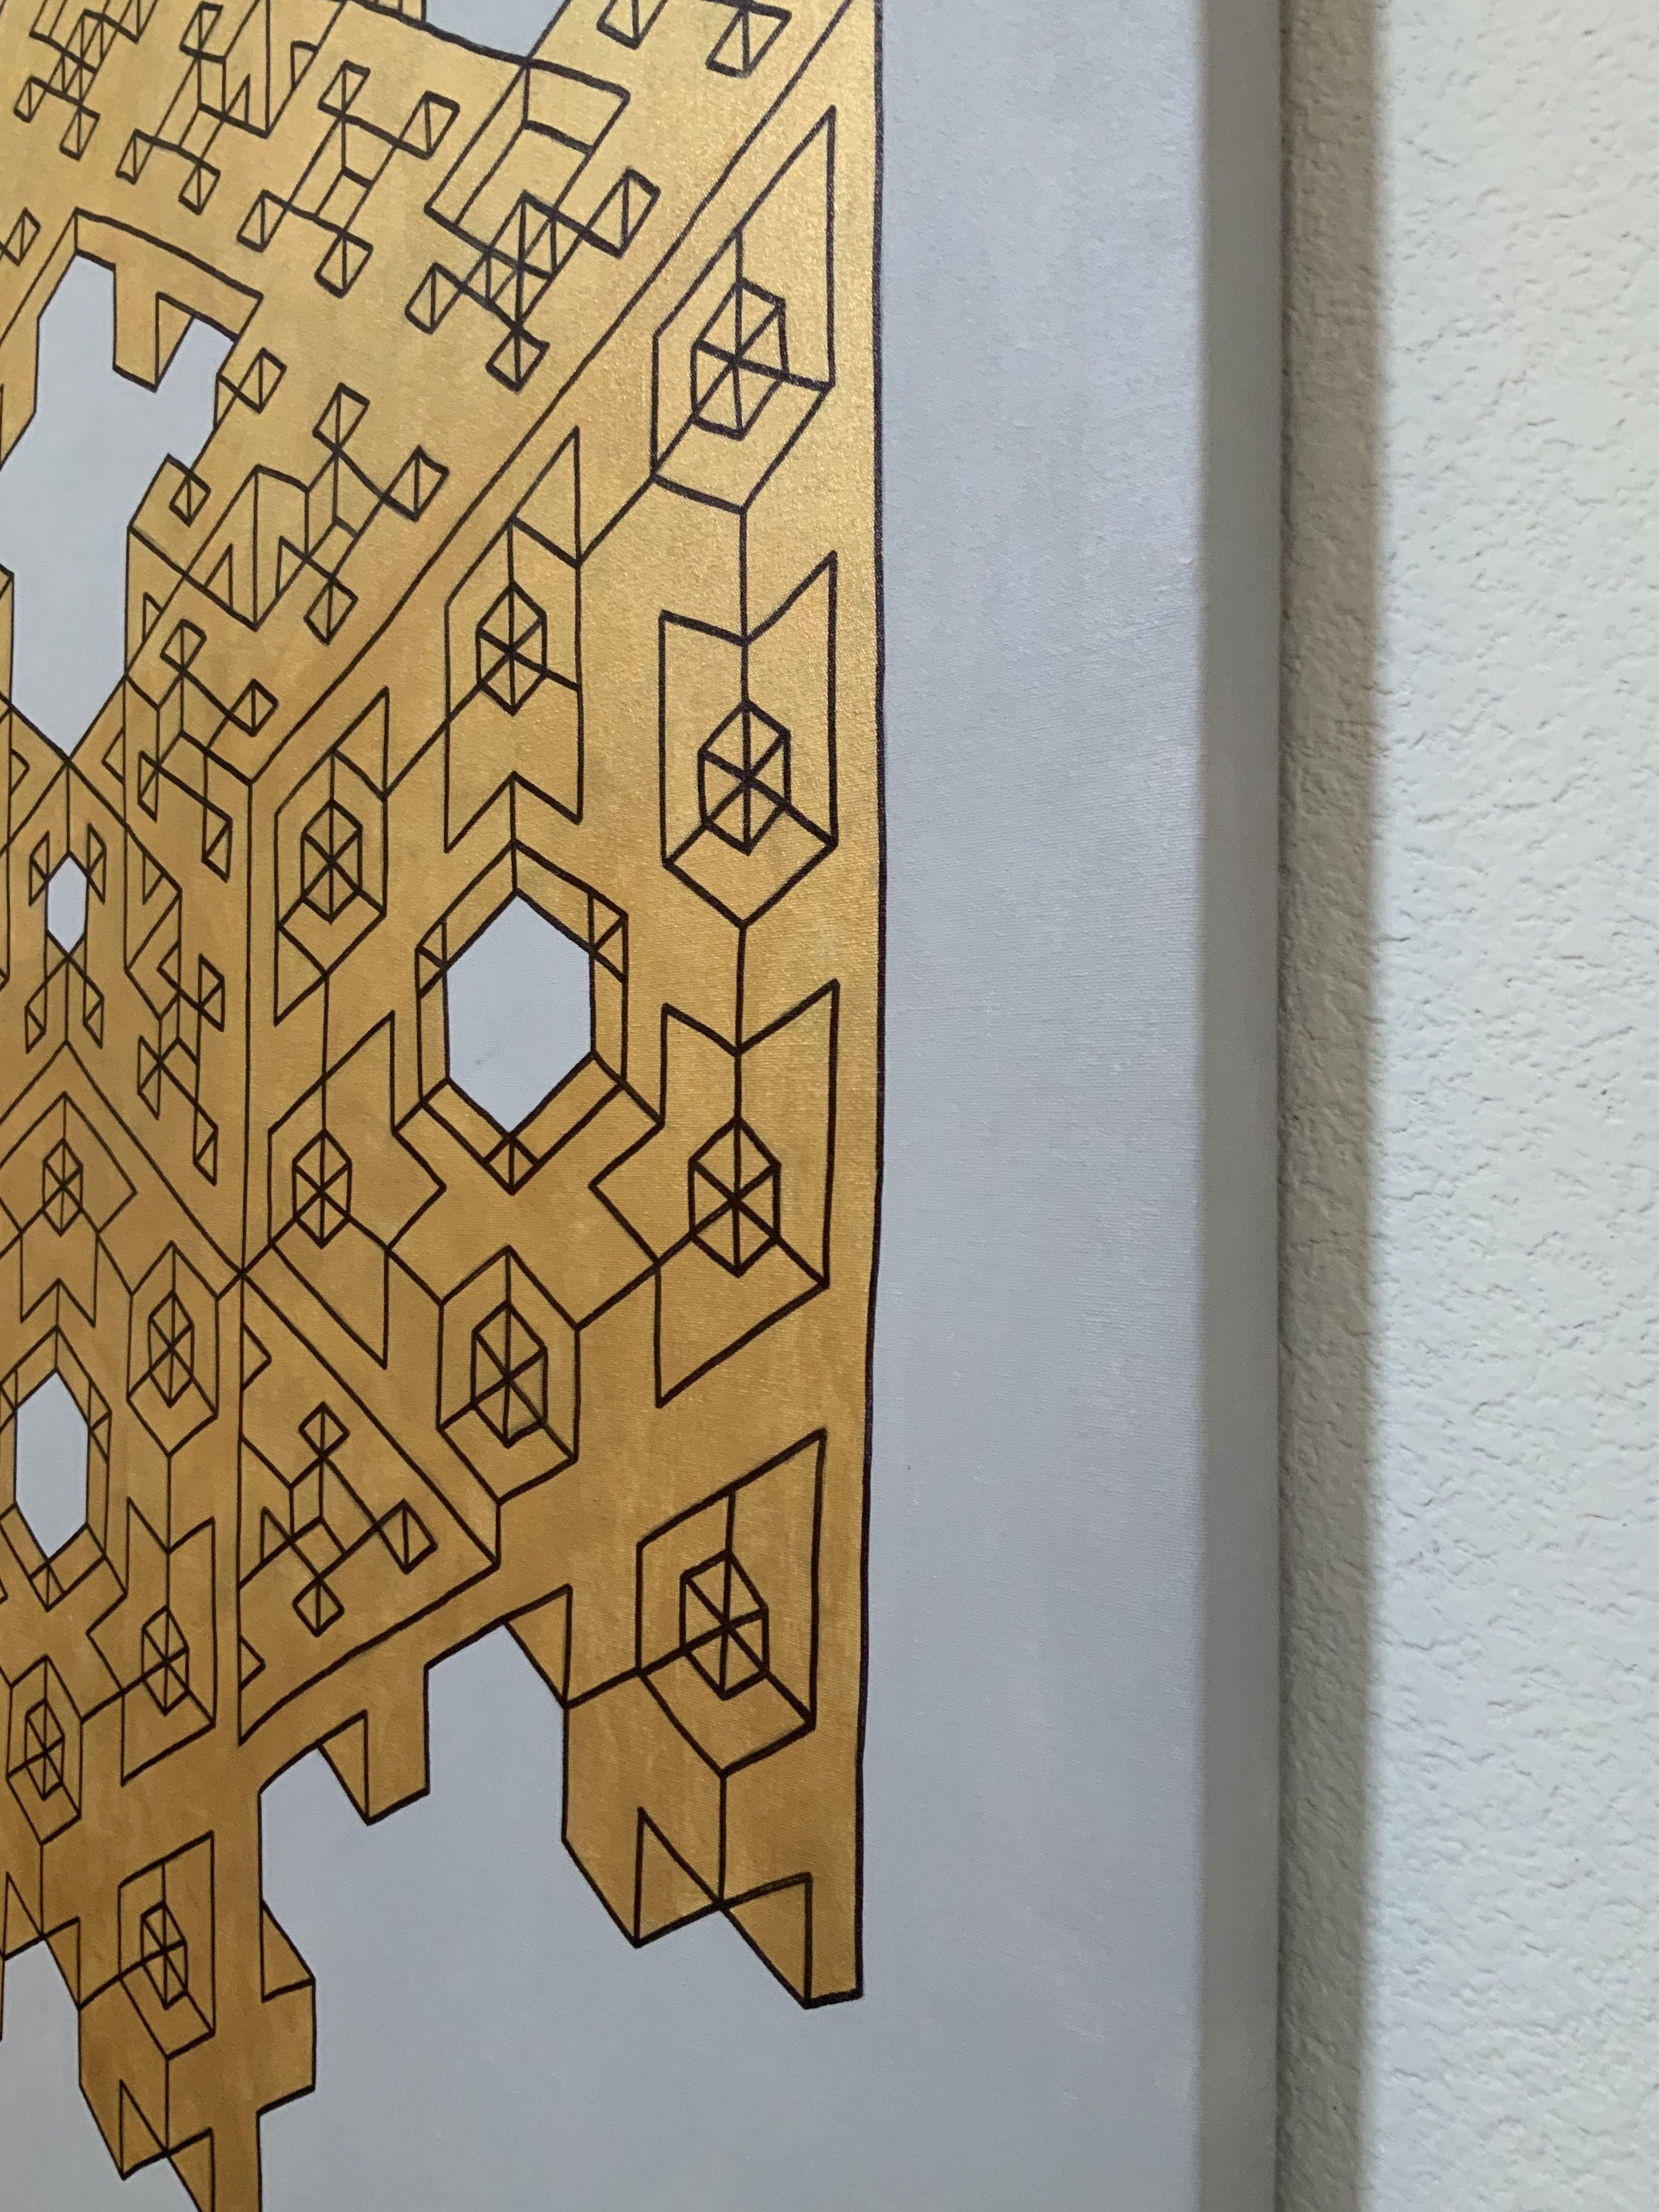 Custom built wooden frame and hand stretched canvas. This original geometric canvas painting is inspired from and directly related to my Origami Sculptures. The end result is an engineered design that is built with the forms of one of my cubic